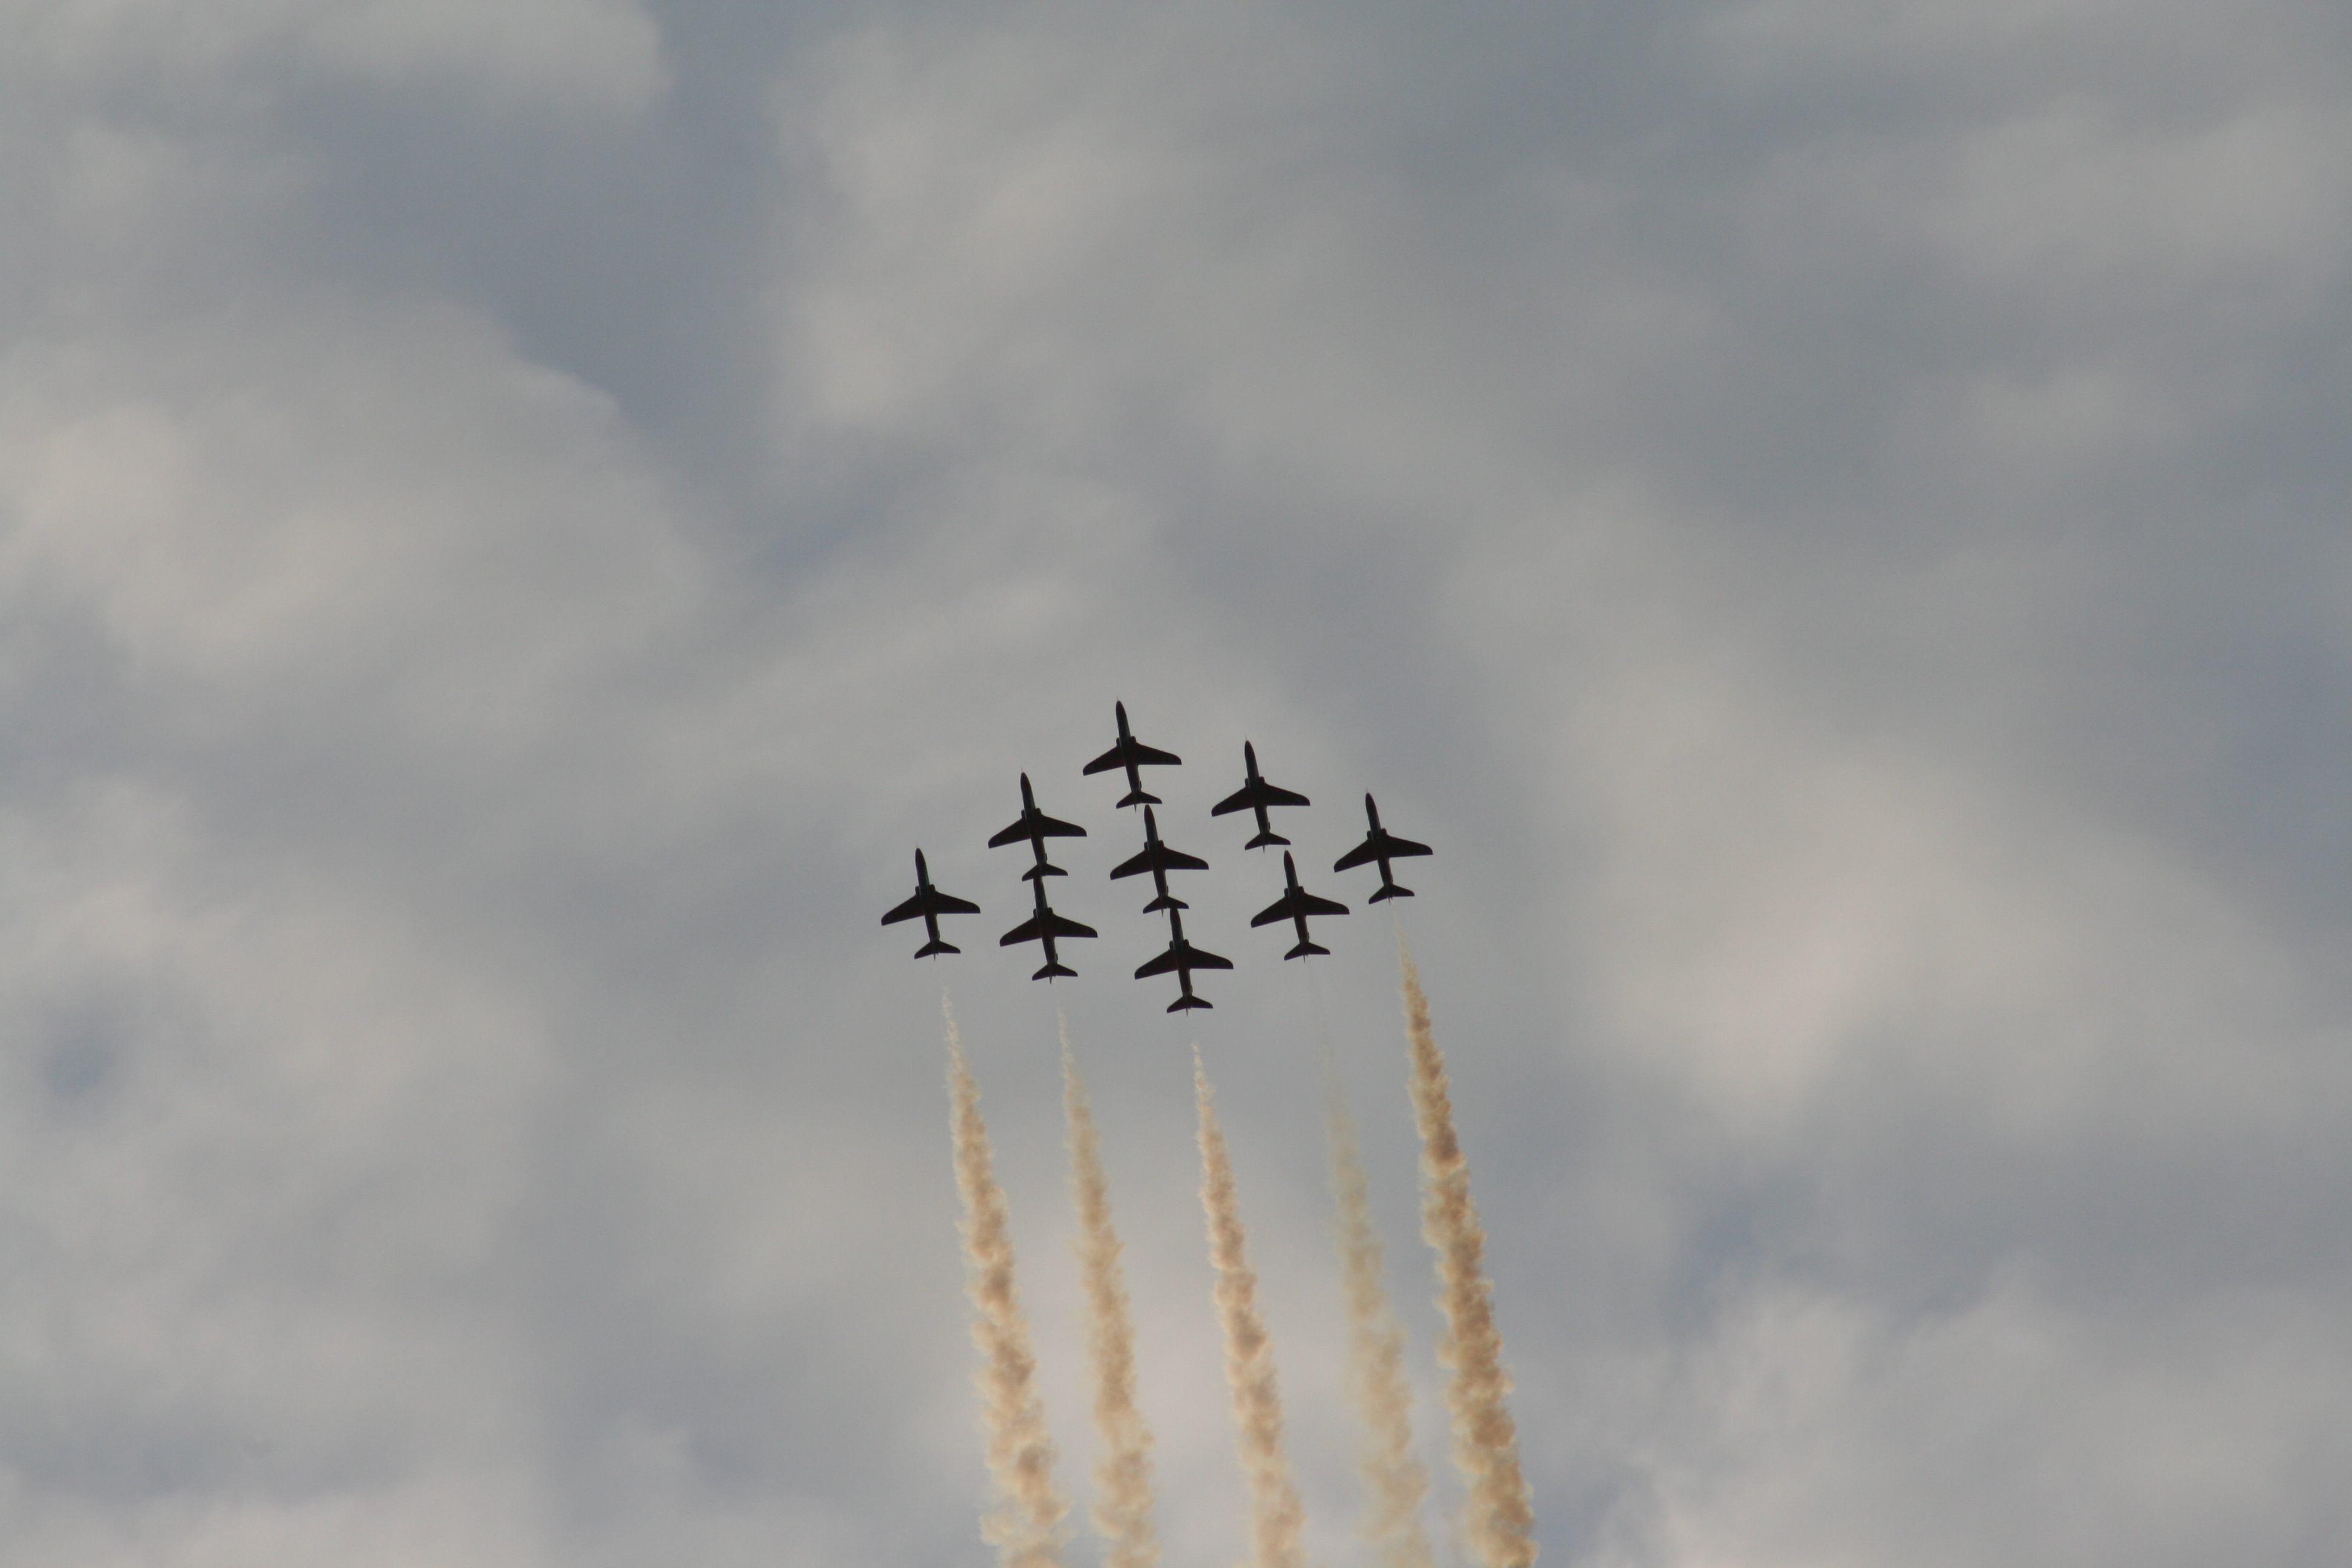 General 3888x2592 airplane aircraft sky Quebec-Airshow-2008 clouds overcast flying silhouette